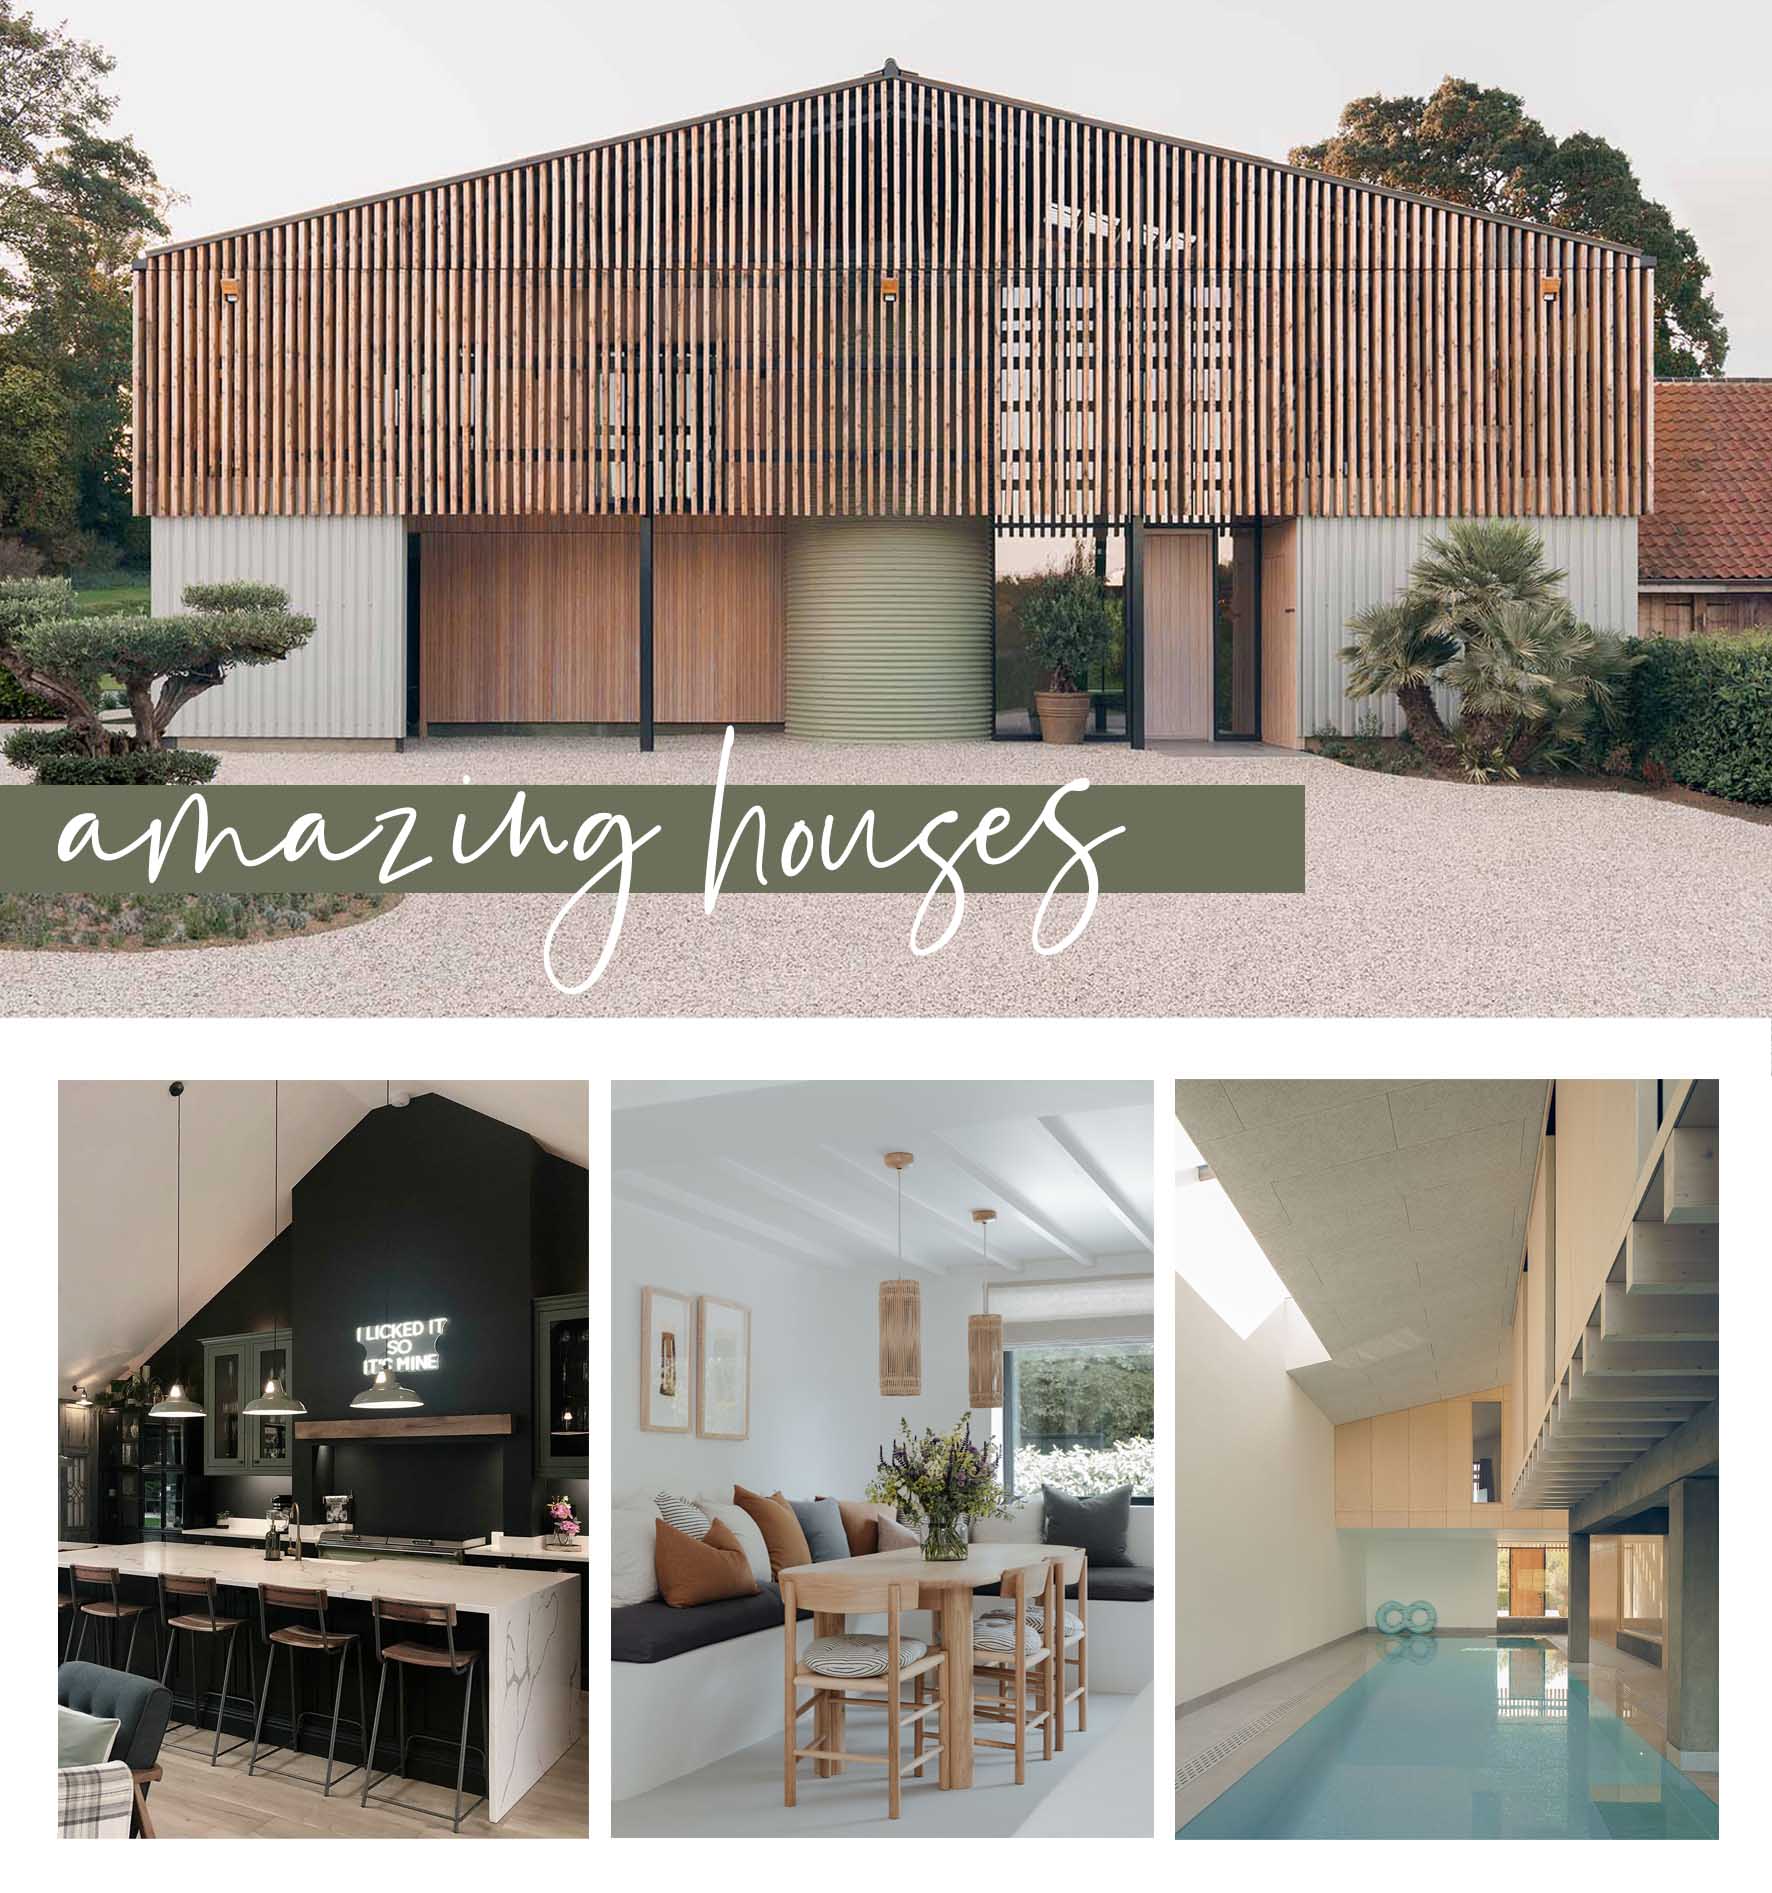 Amazing houses - a collage of incredible shooting spaces in Norfolk including award-winning architectural spaces. Available to hire as locations for photoshoots.